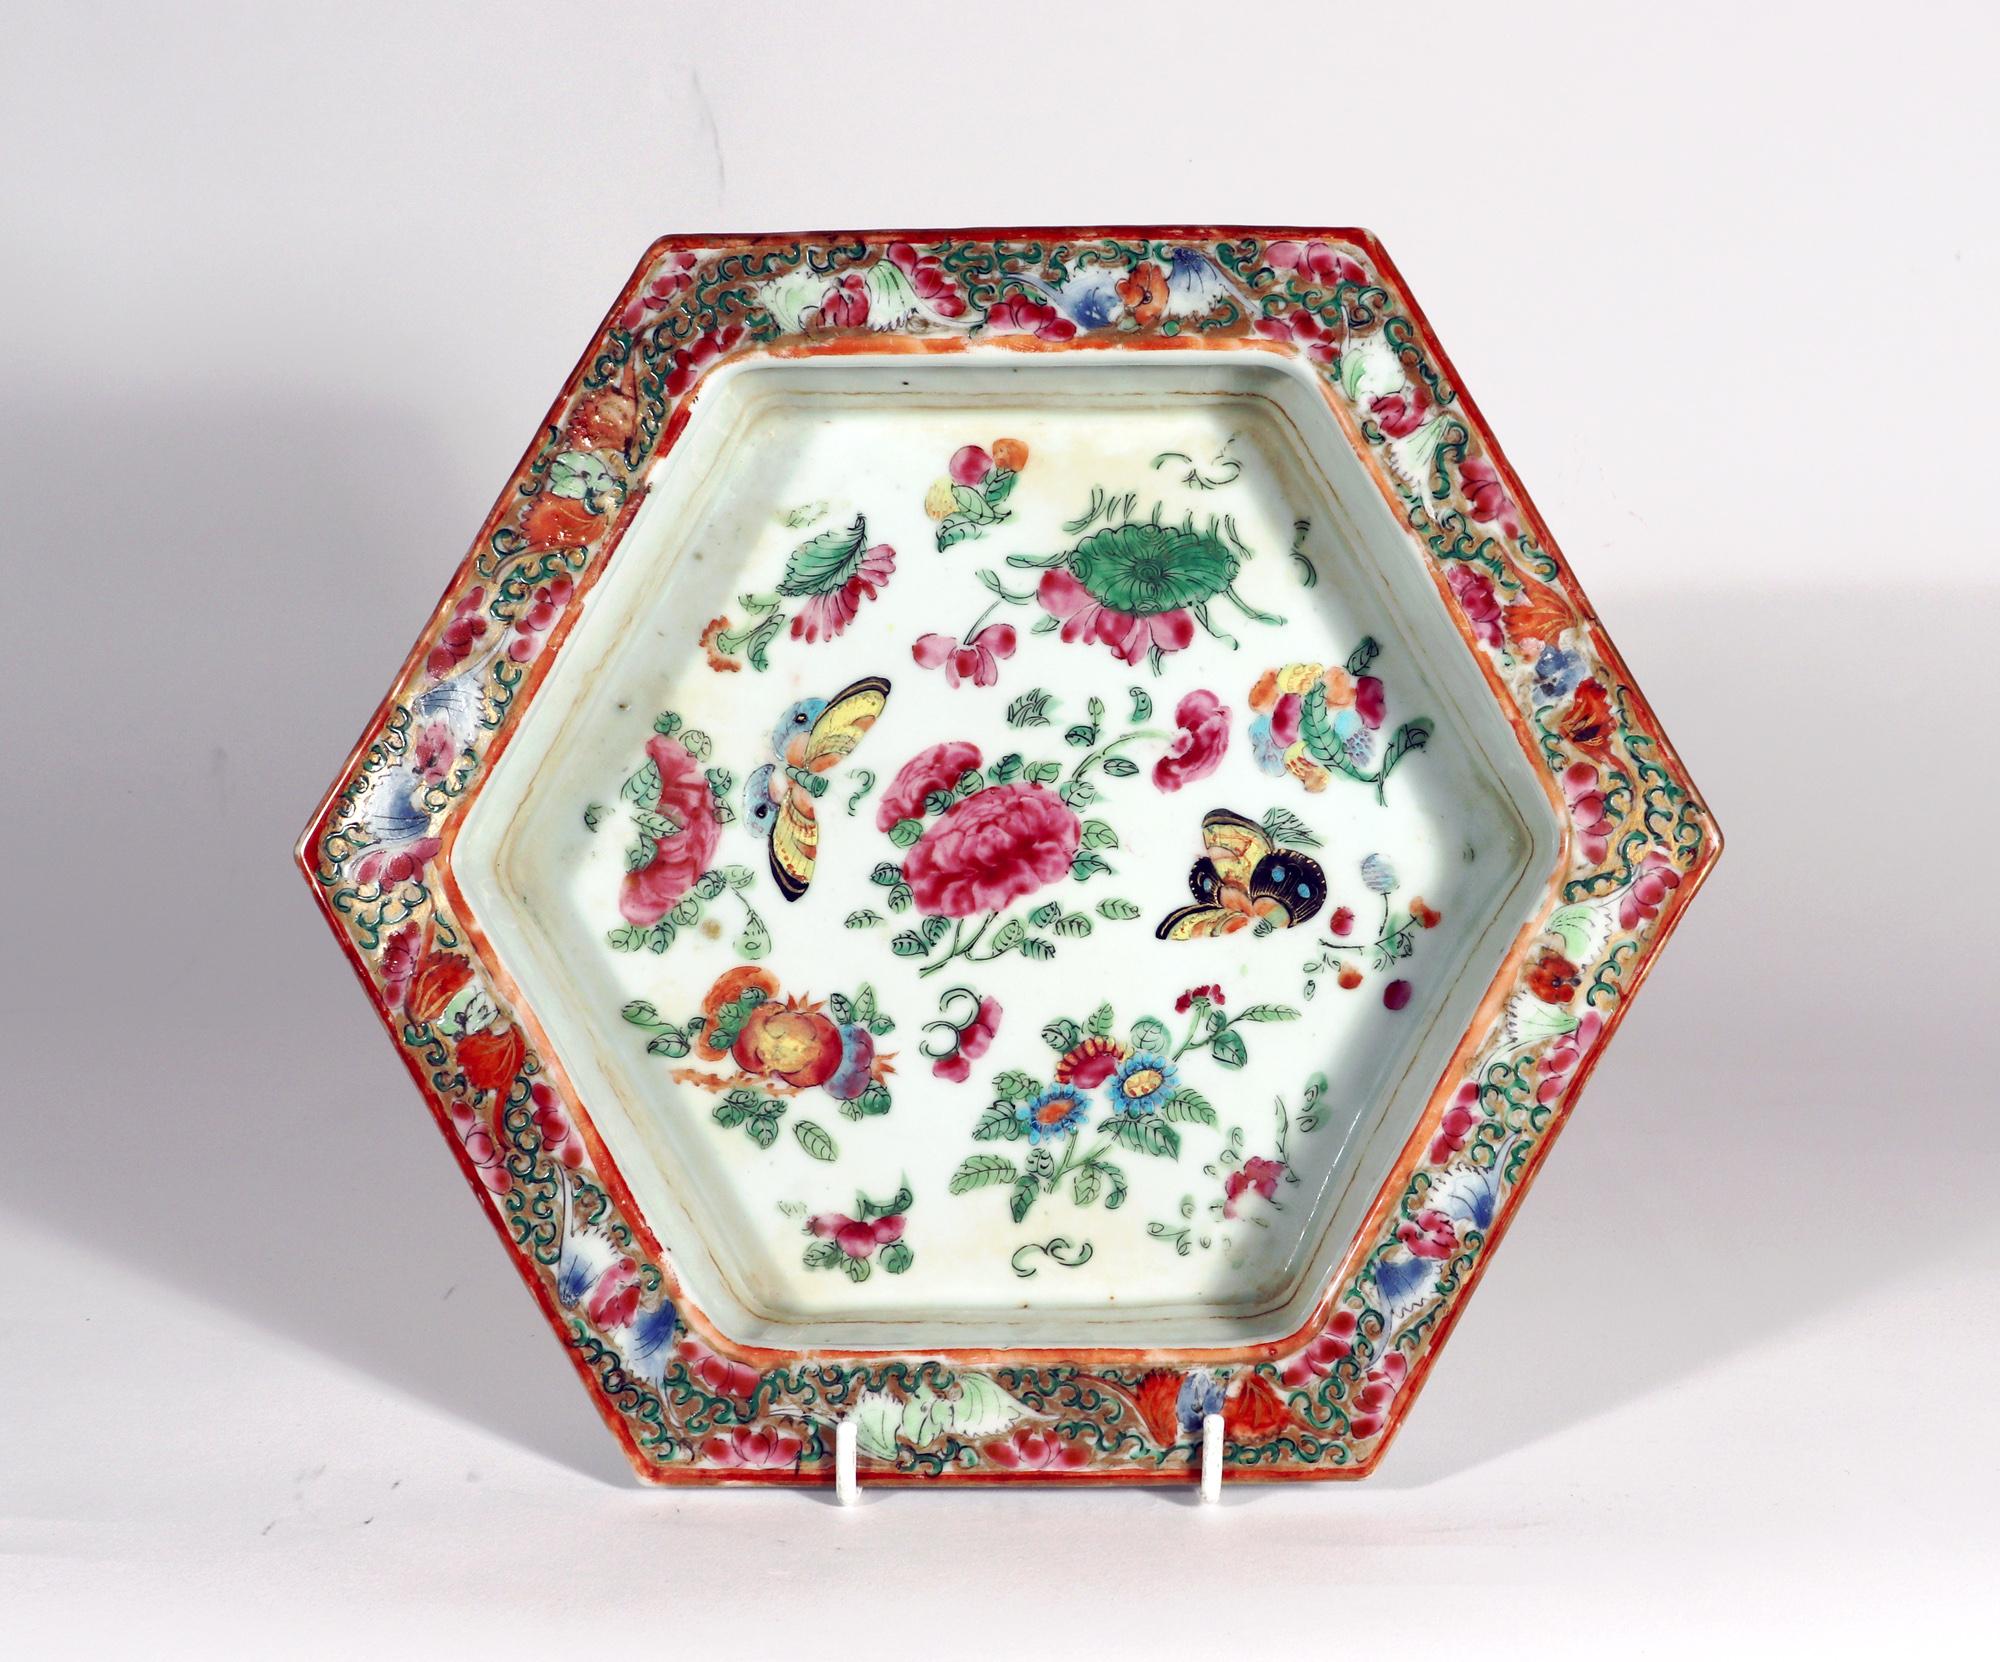 Chinese Export Porcelain Rose Canton Cache Pot & Stand,
1820-1840

The large hexagonal-shaped Chinese Export porcelain cache pot has six panels with different scenes from Chinese mythology, the base of each arched. There is a continuous band of